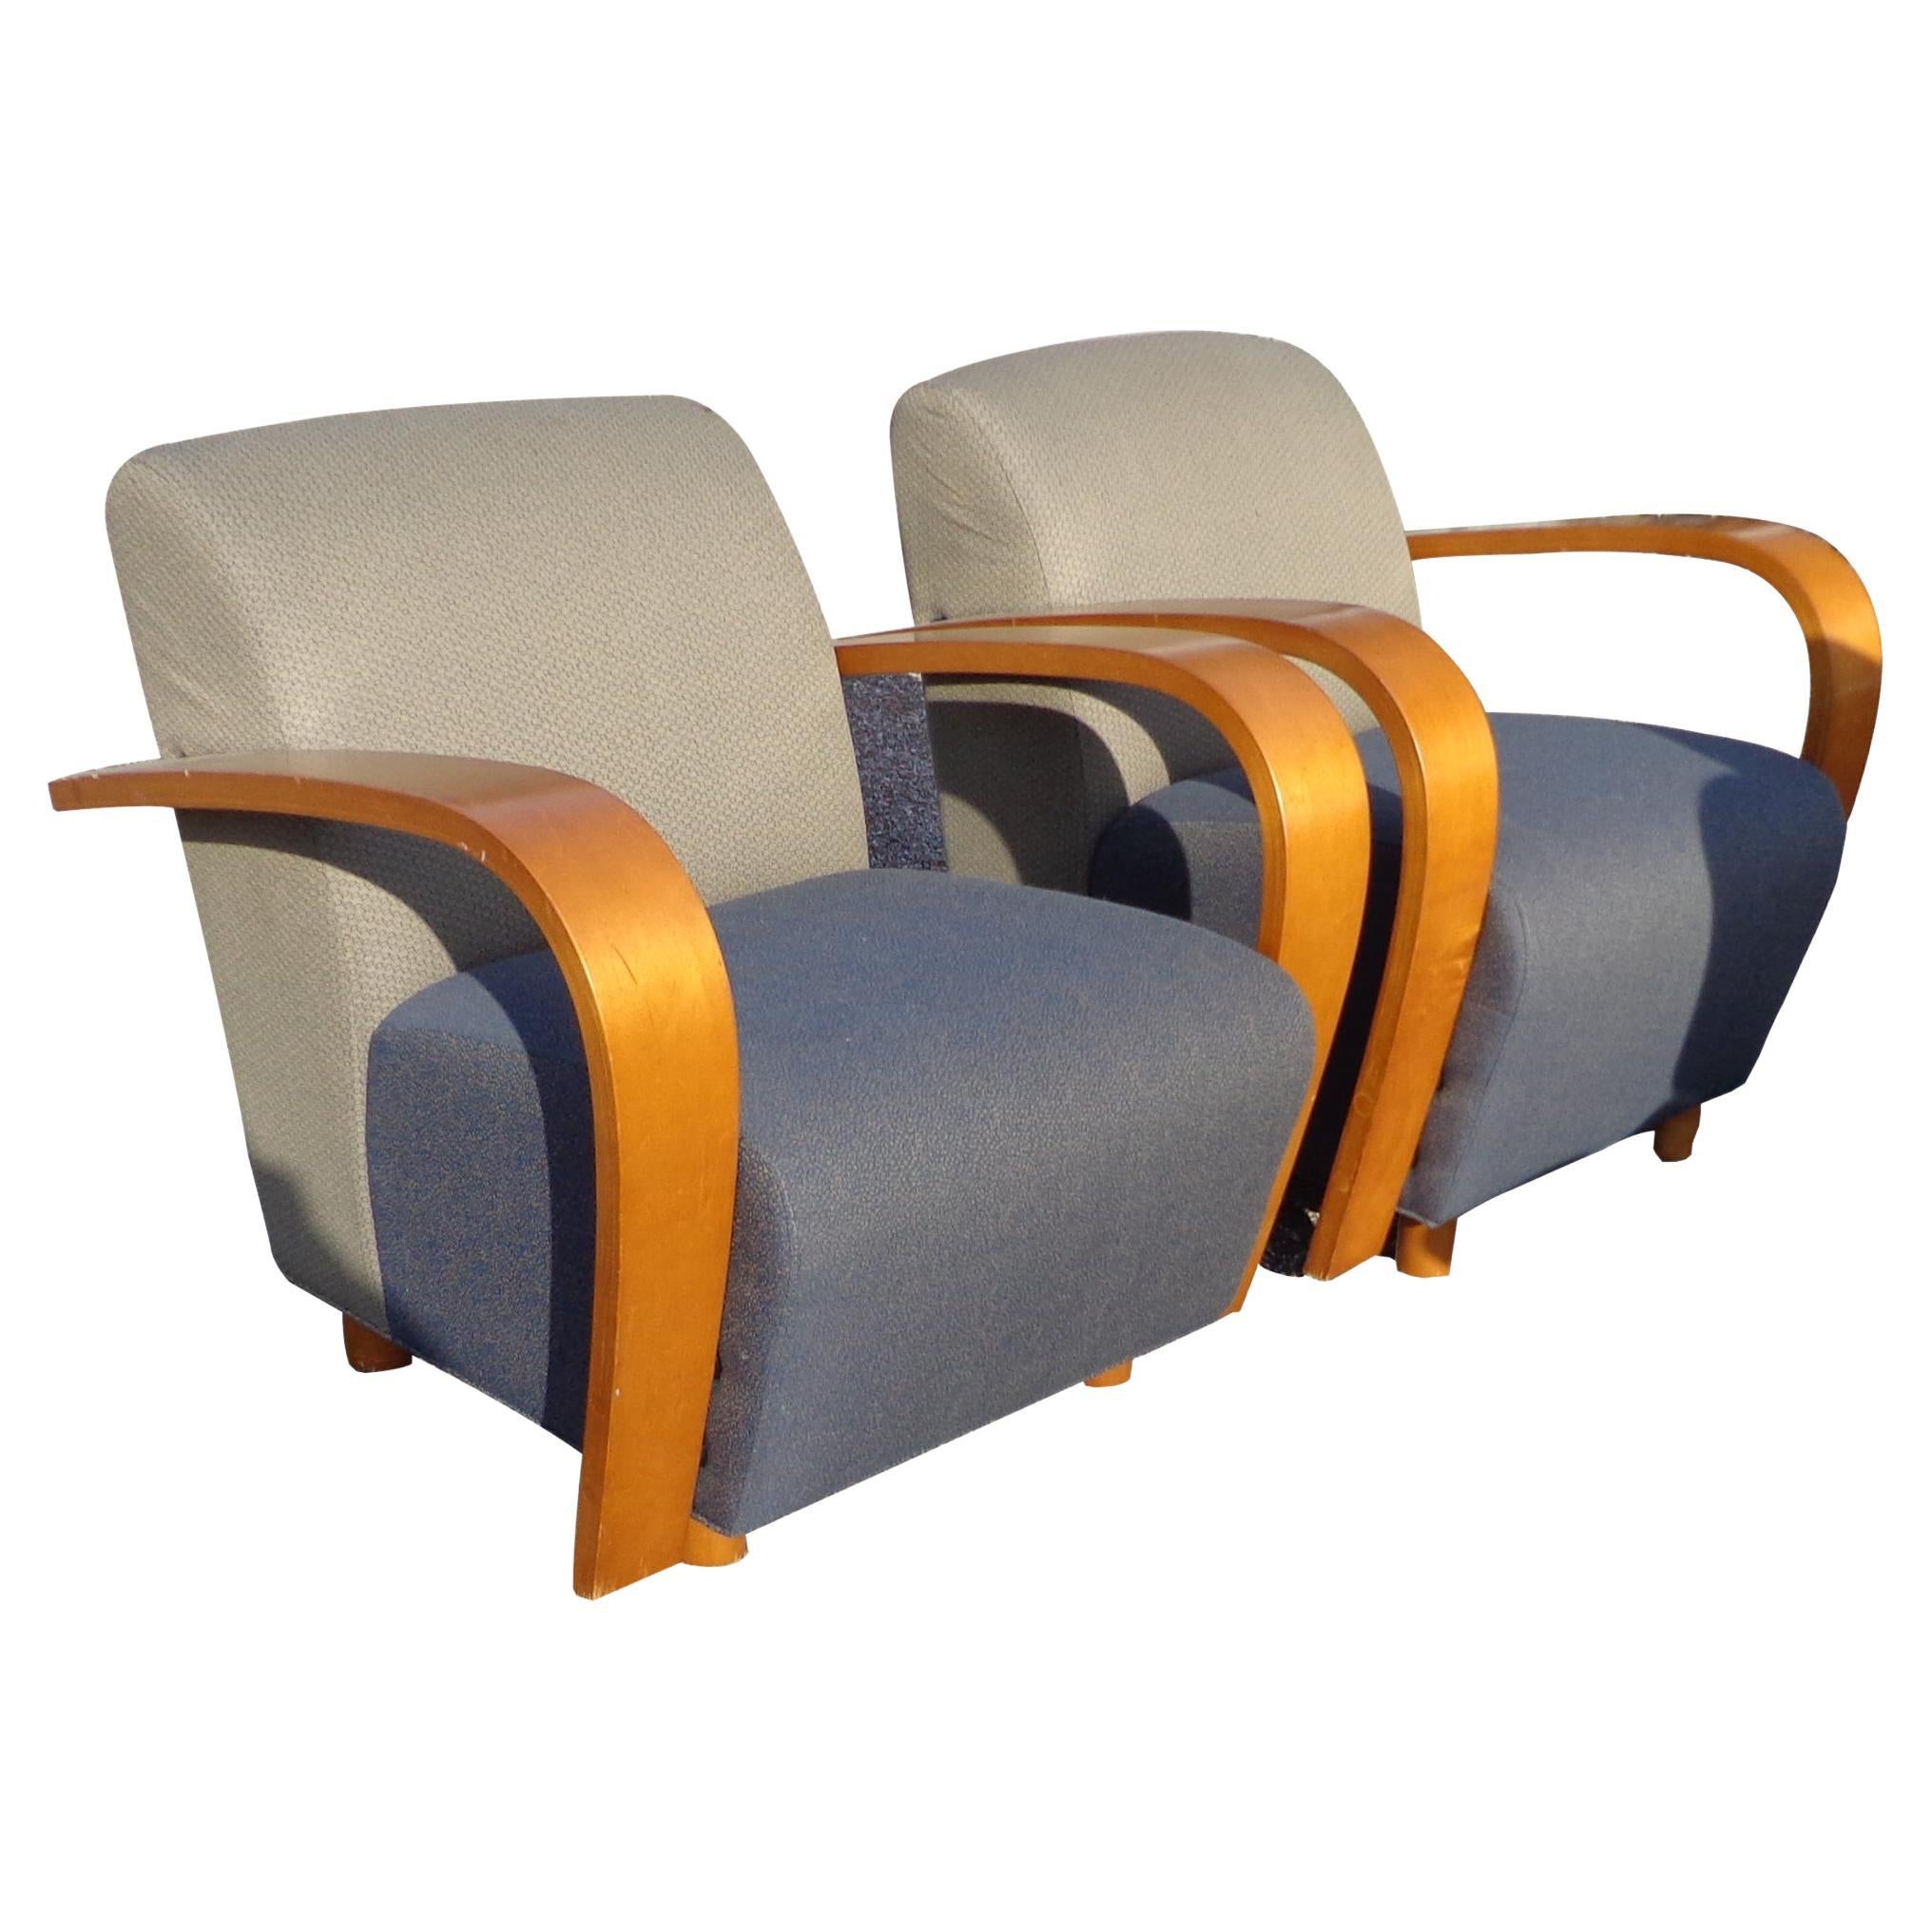 Pair of Art Deco Style Jack Cartwright Lounge Chairs